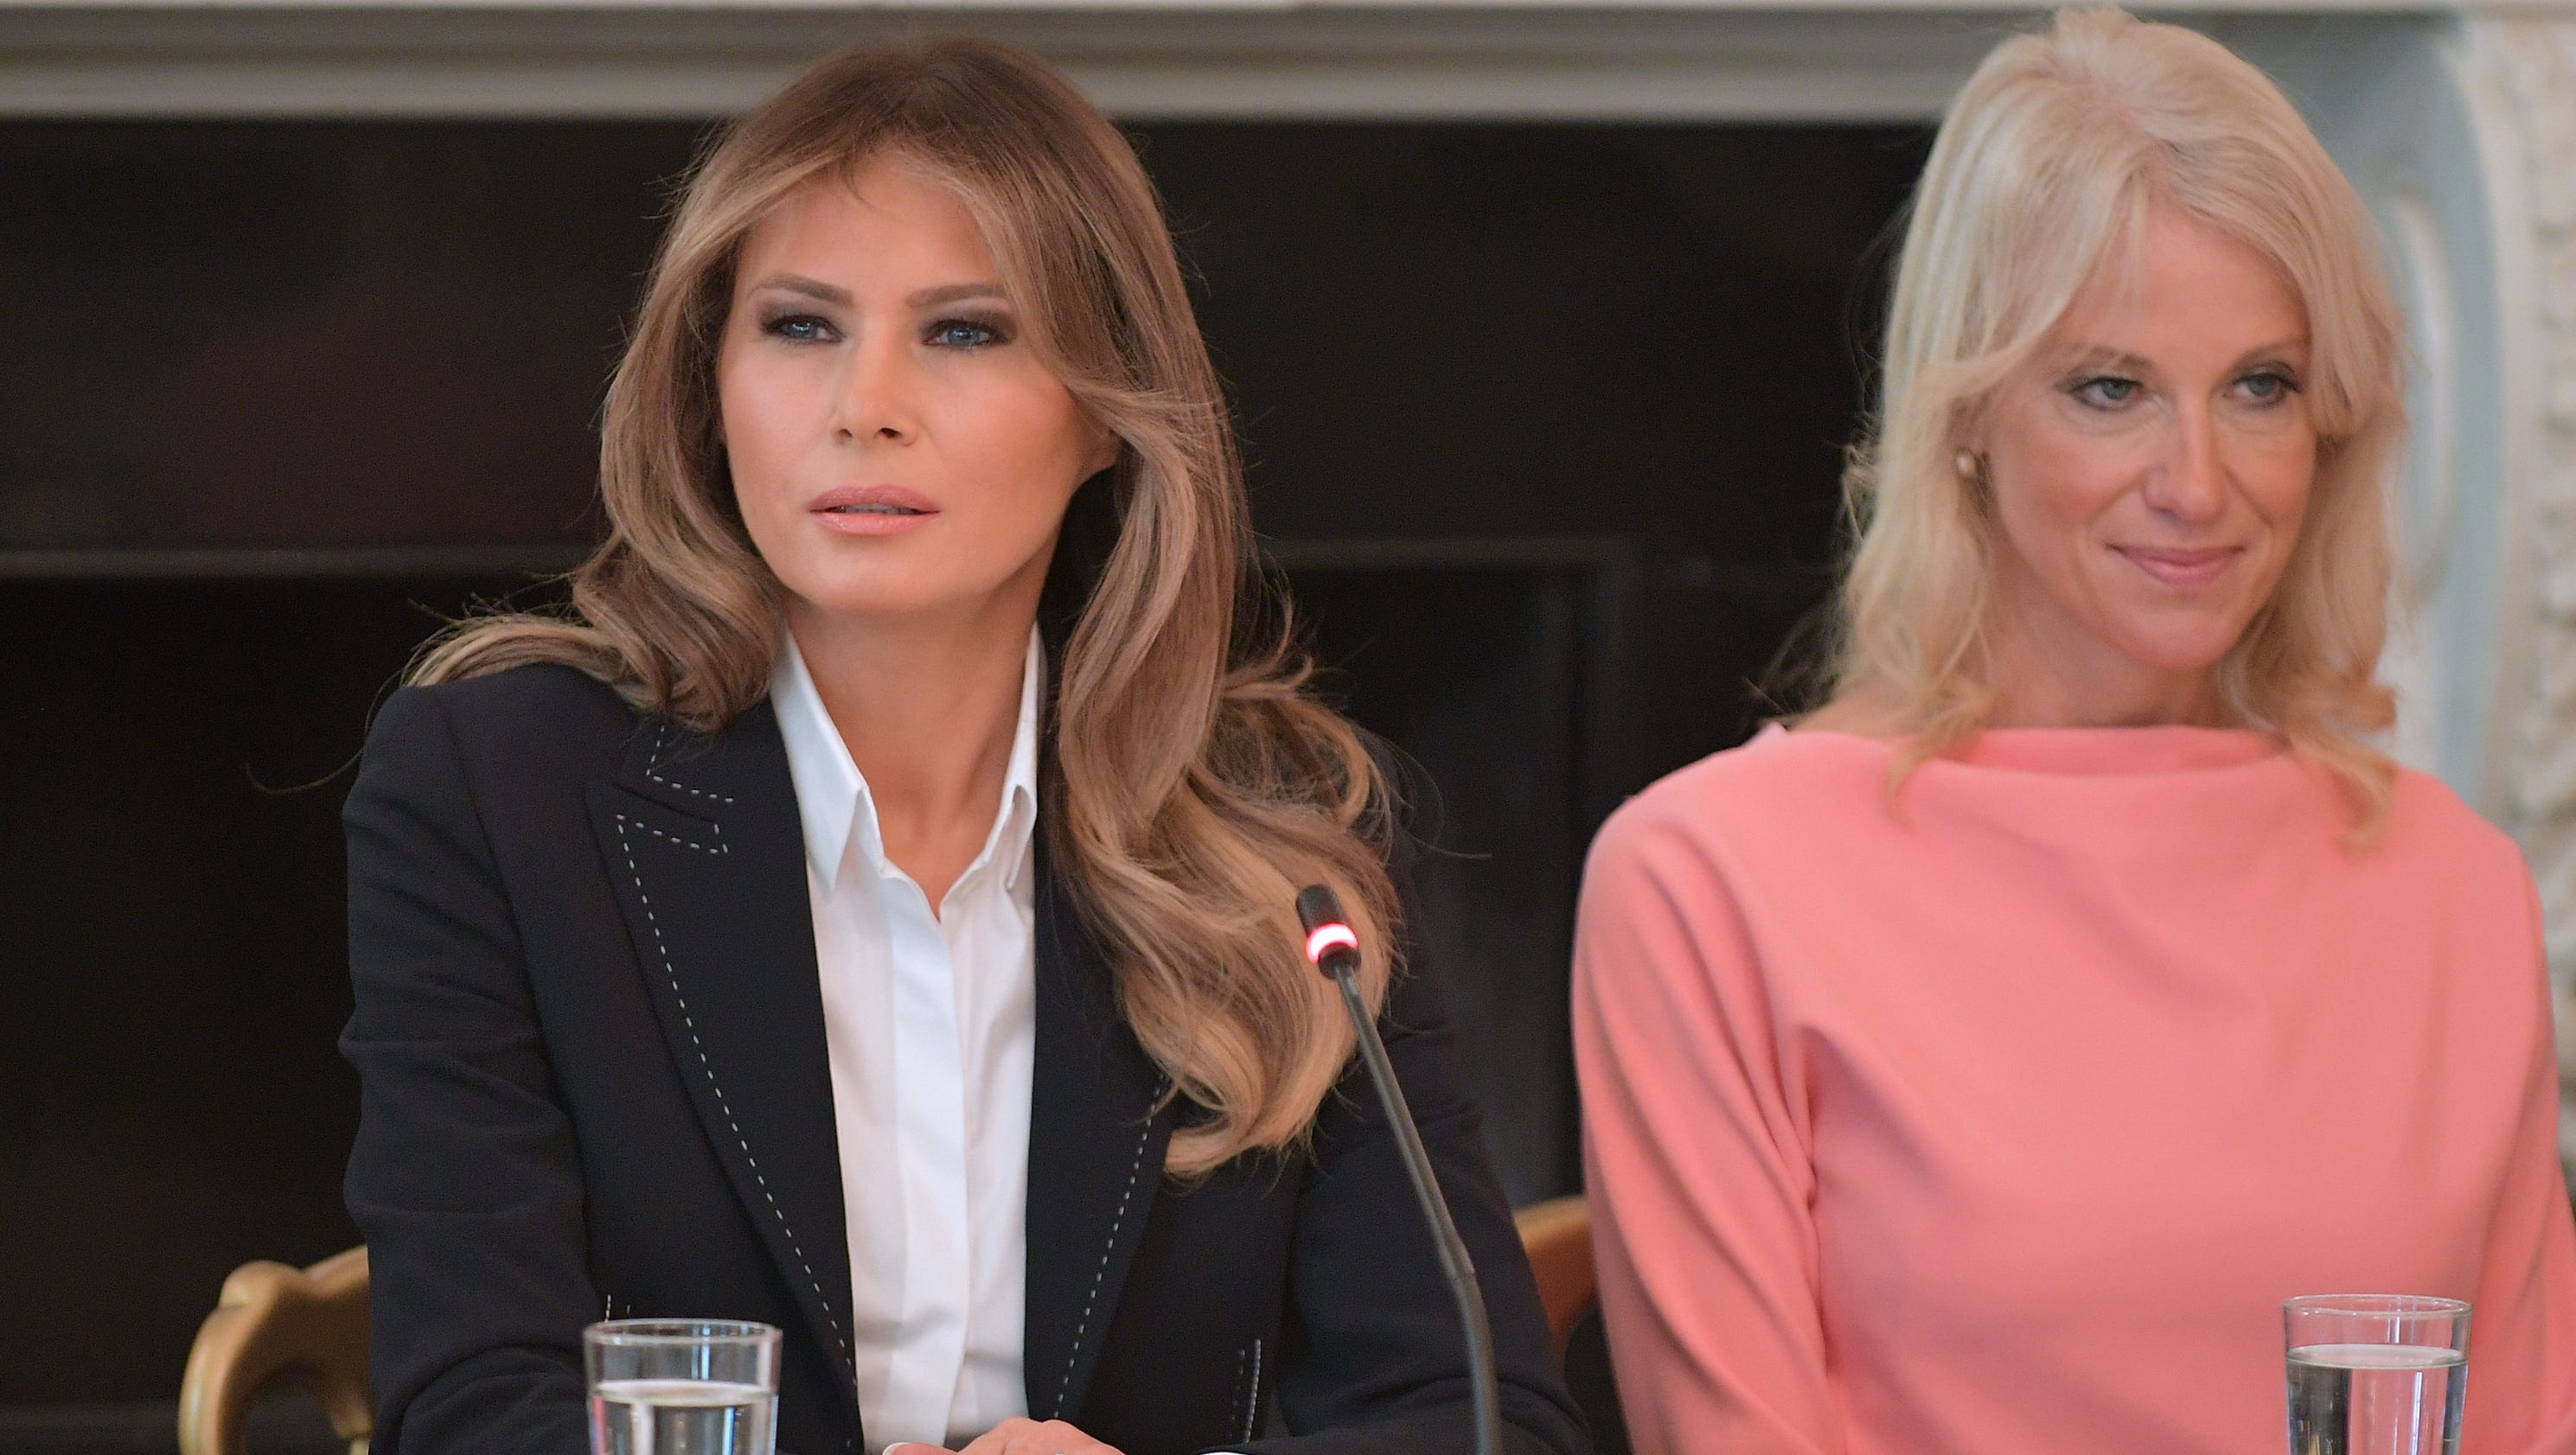 First lady Melania Trump hears from families impacted by opioid abuse